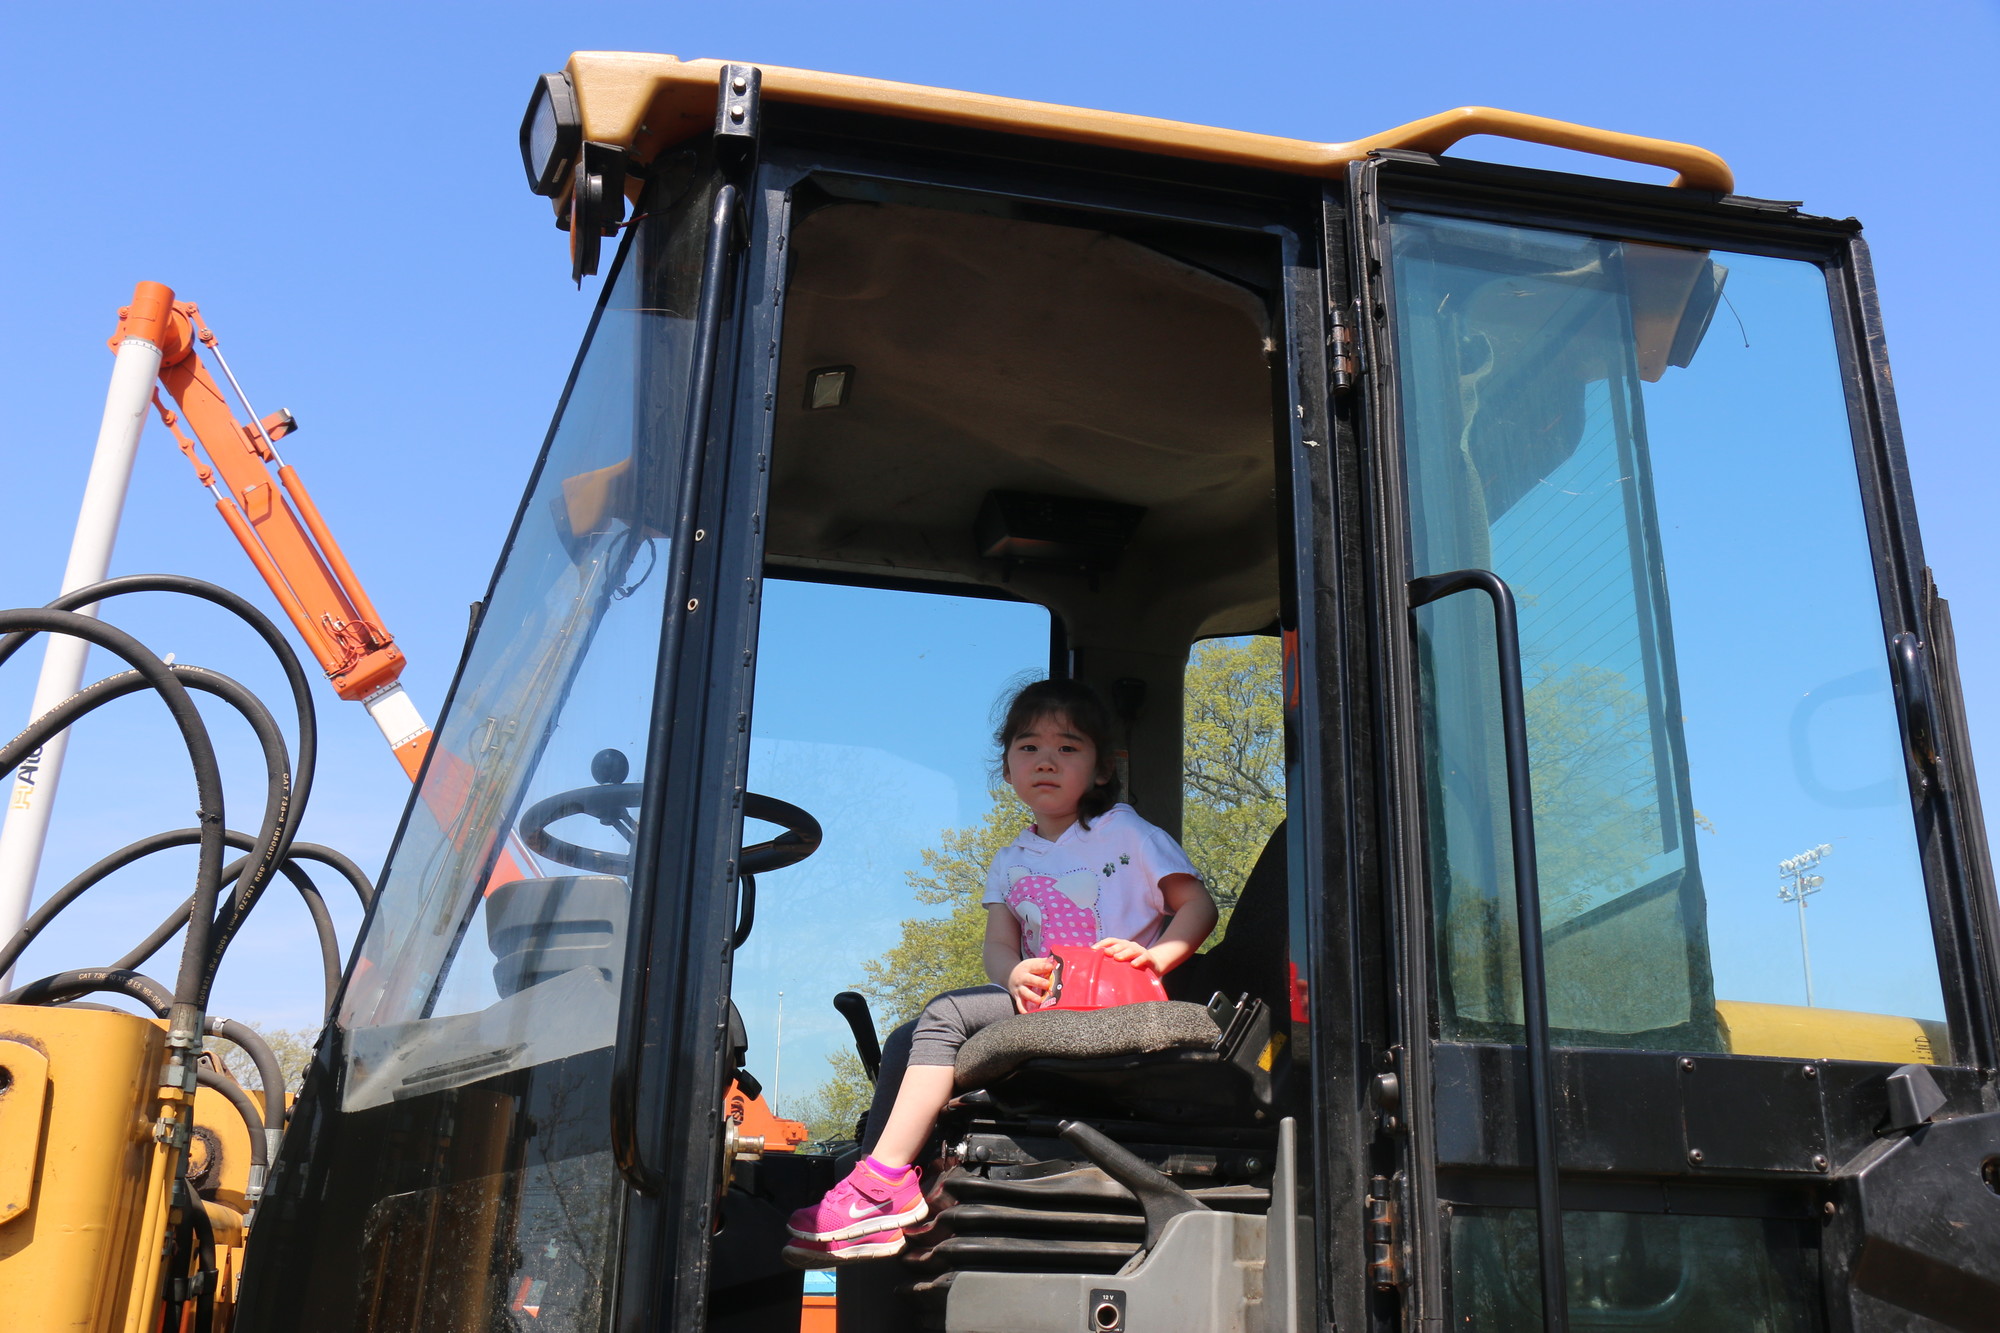 Dalia Park, 4, took in the view from the bulldozer’s cab.